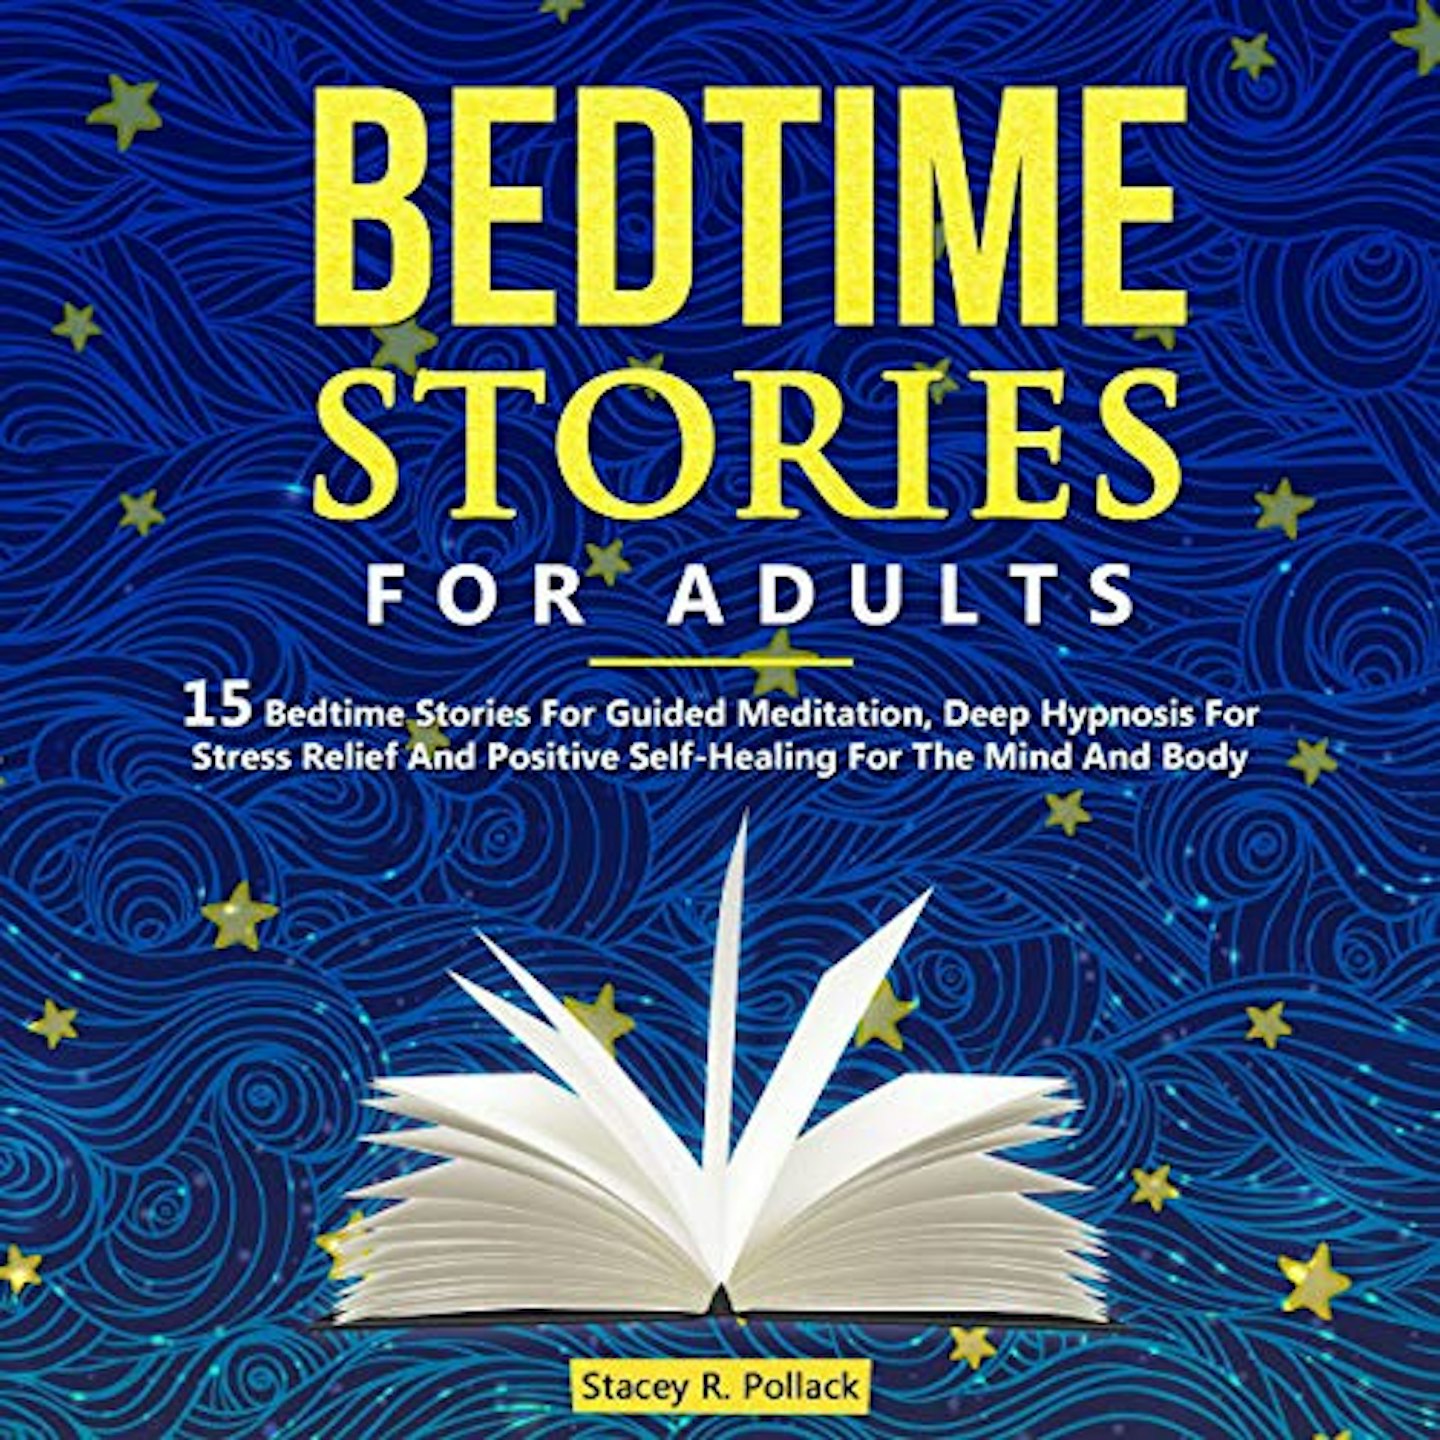 Bedtime Stories for Adults: 15 Bedtime Stories for Guided Meditation, Deep Hypnosis for Stress Relief and Positive Self-Healing for the Mind and Body